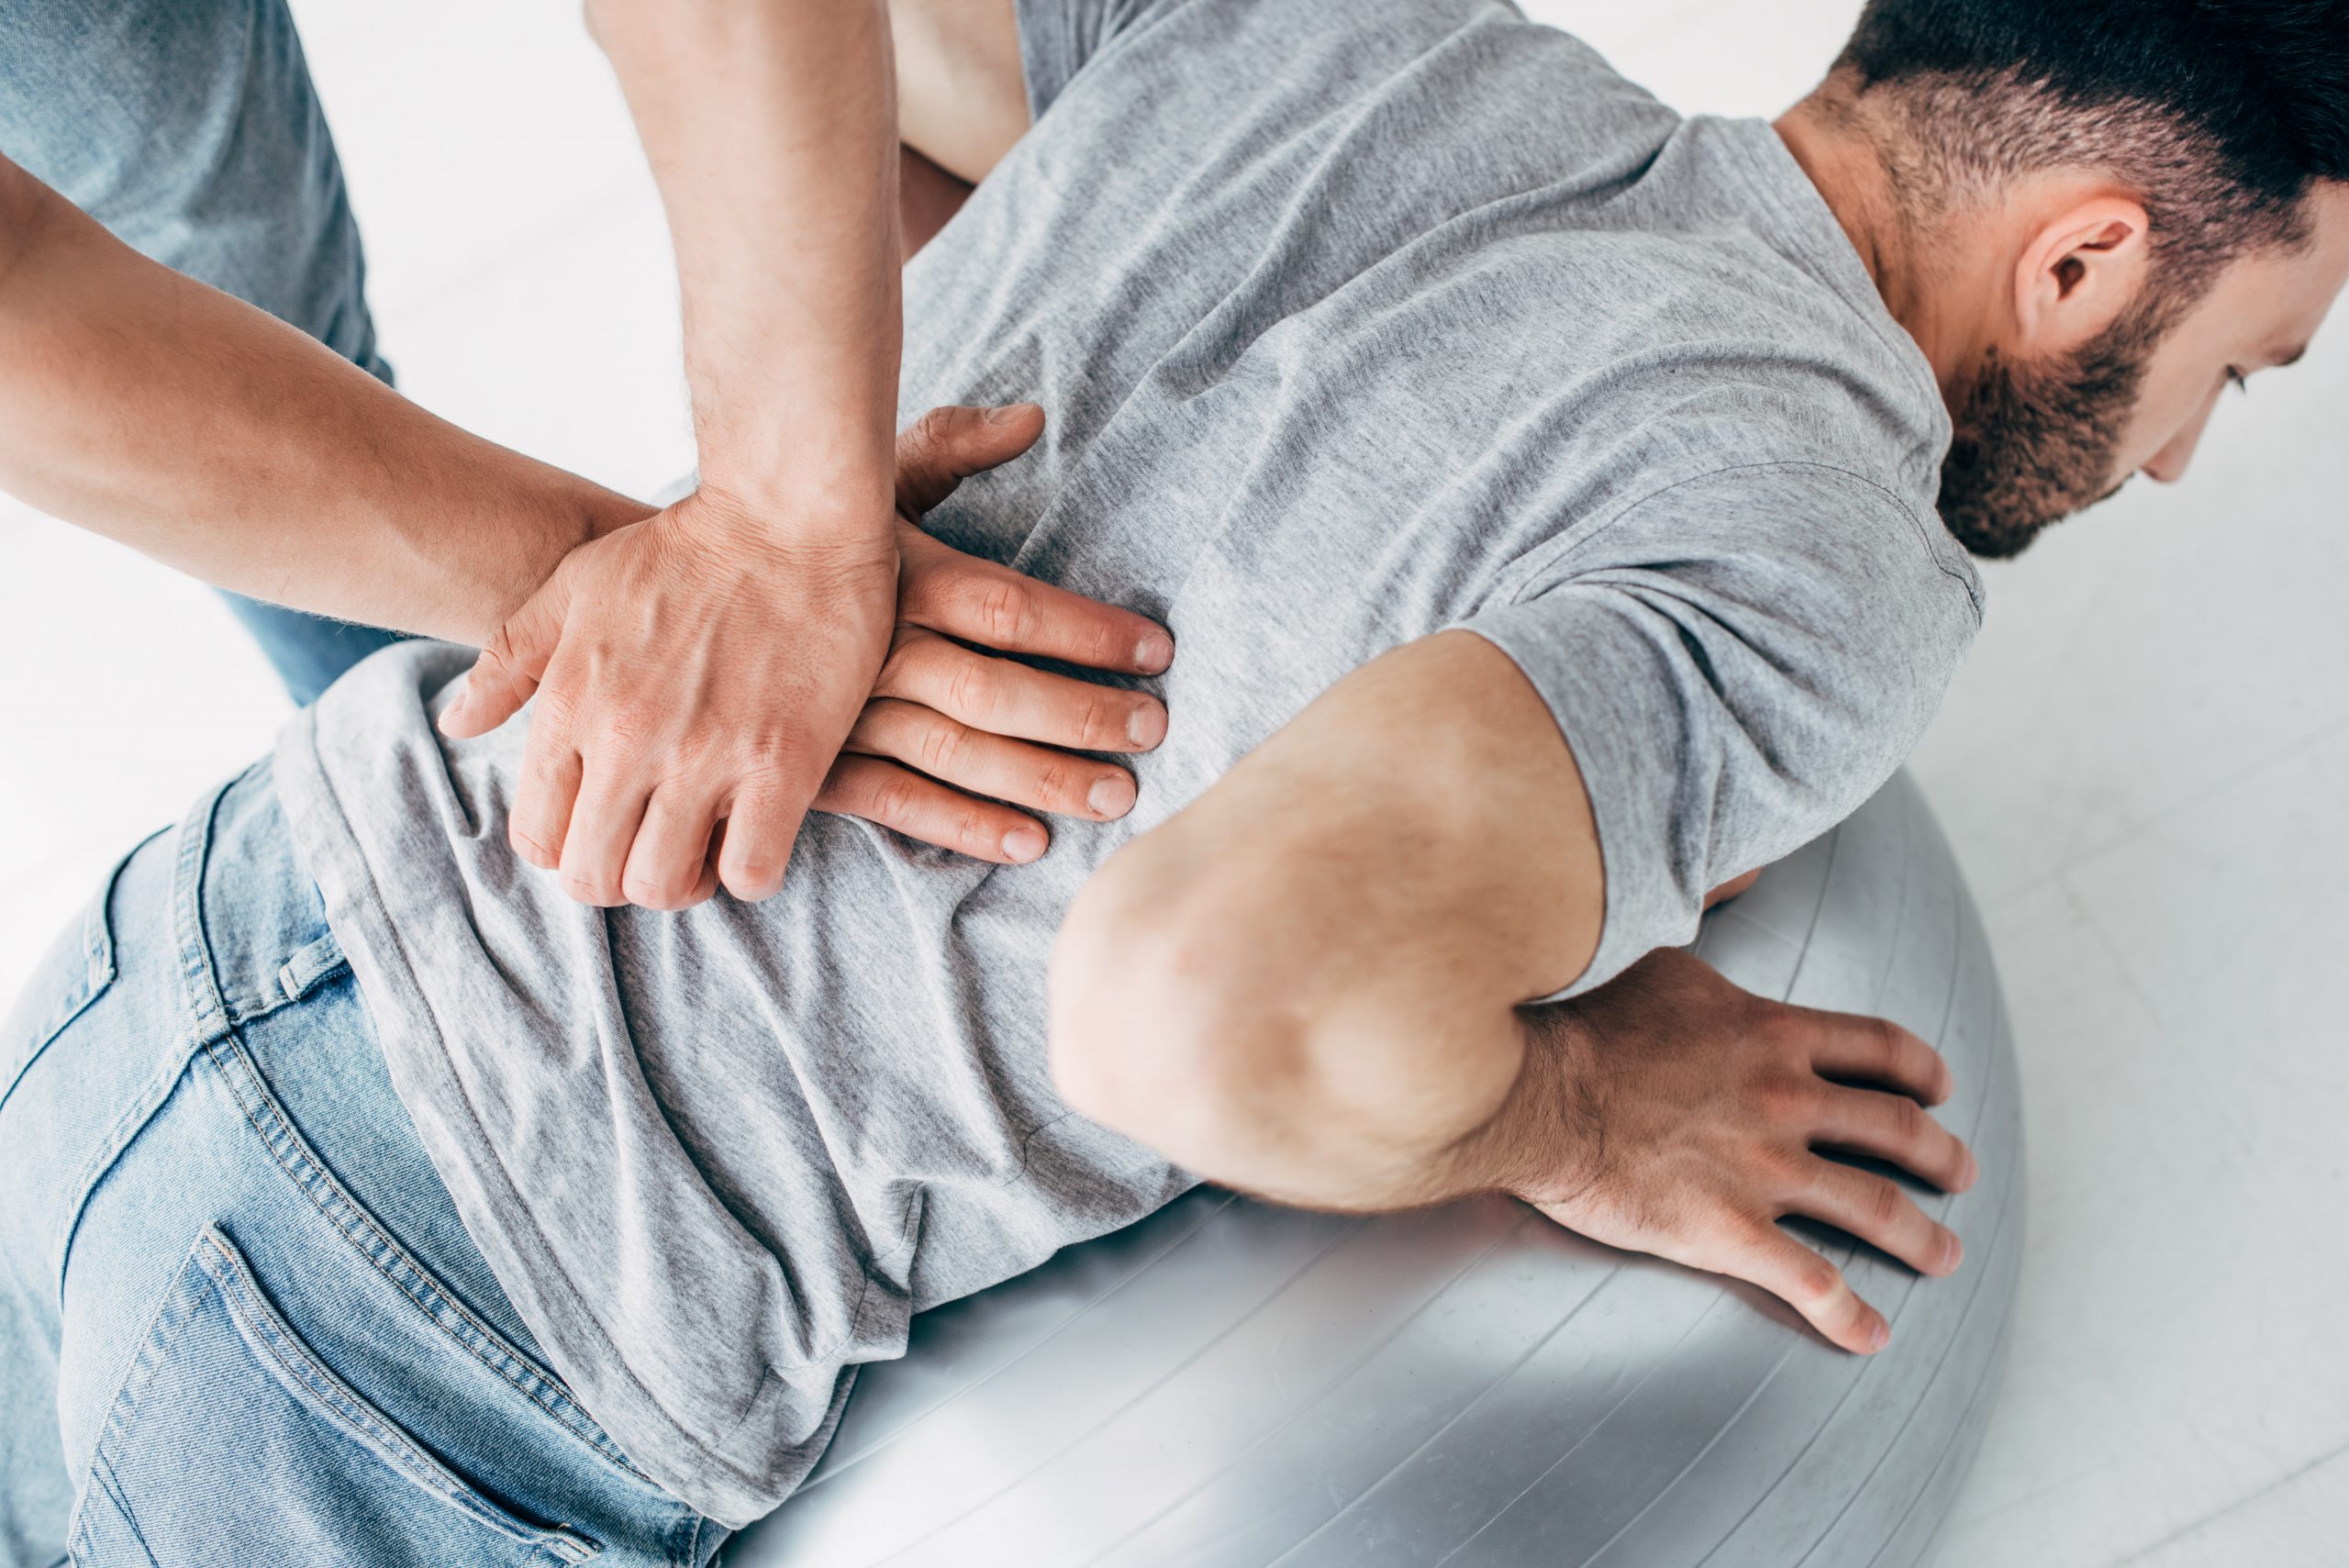 chiropractor treating back pain on man lying on a medicine ball